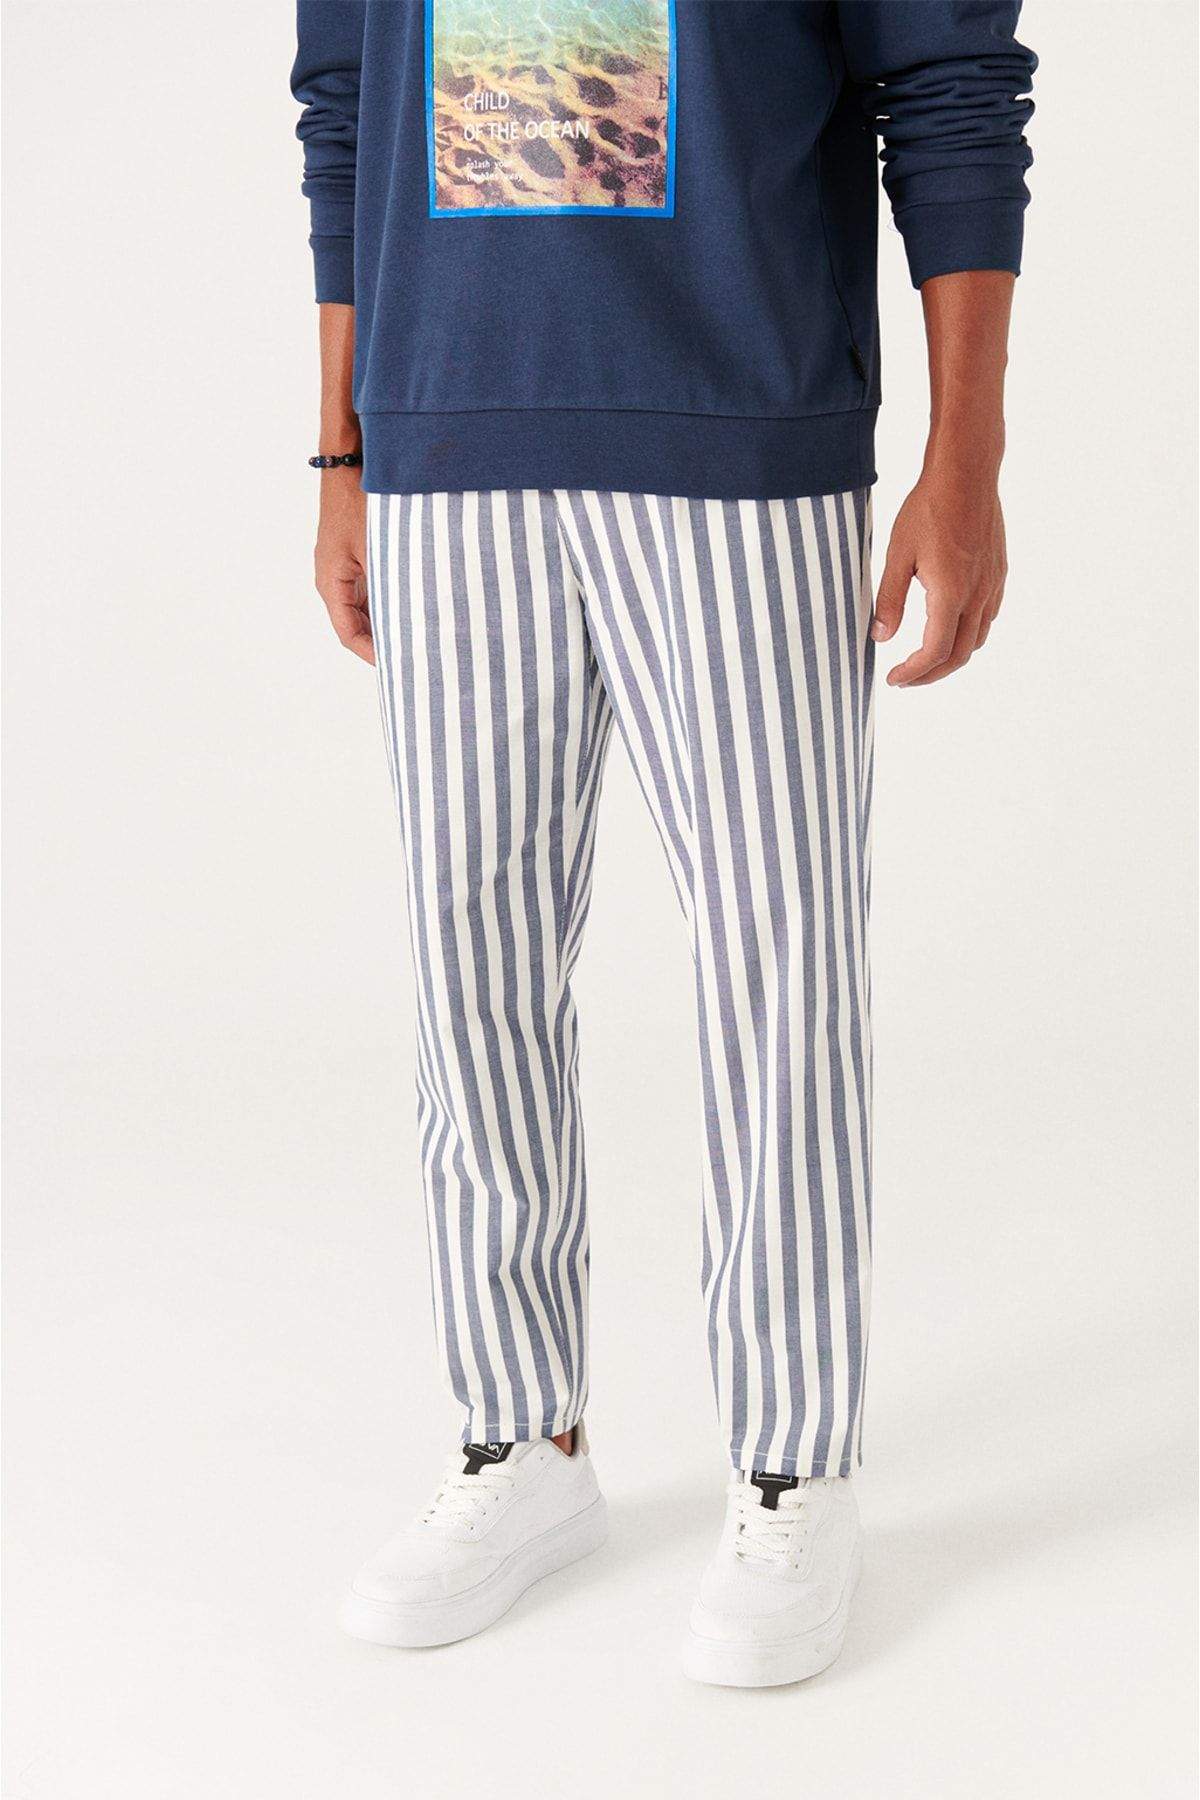 mens-white-navy-wide-striped-relaxed-fit-trousers-a21y3014